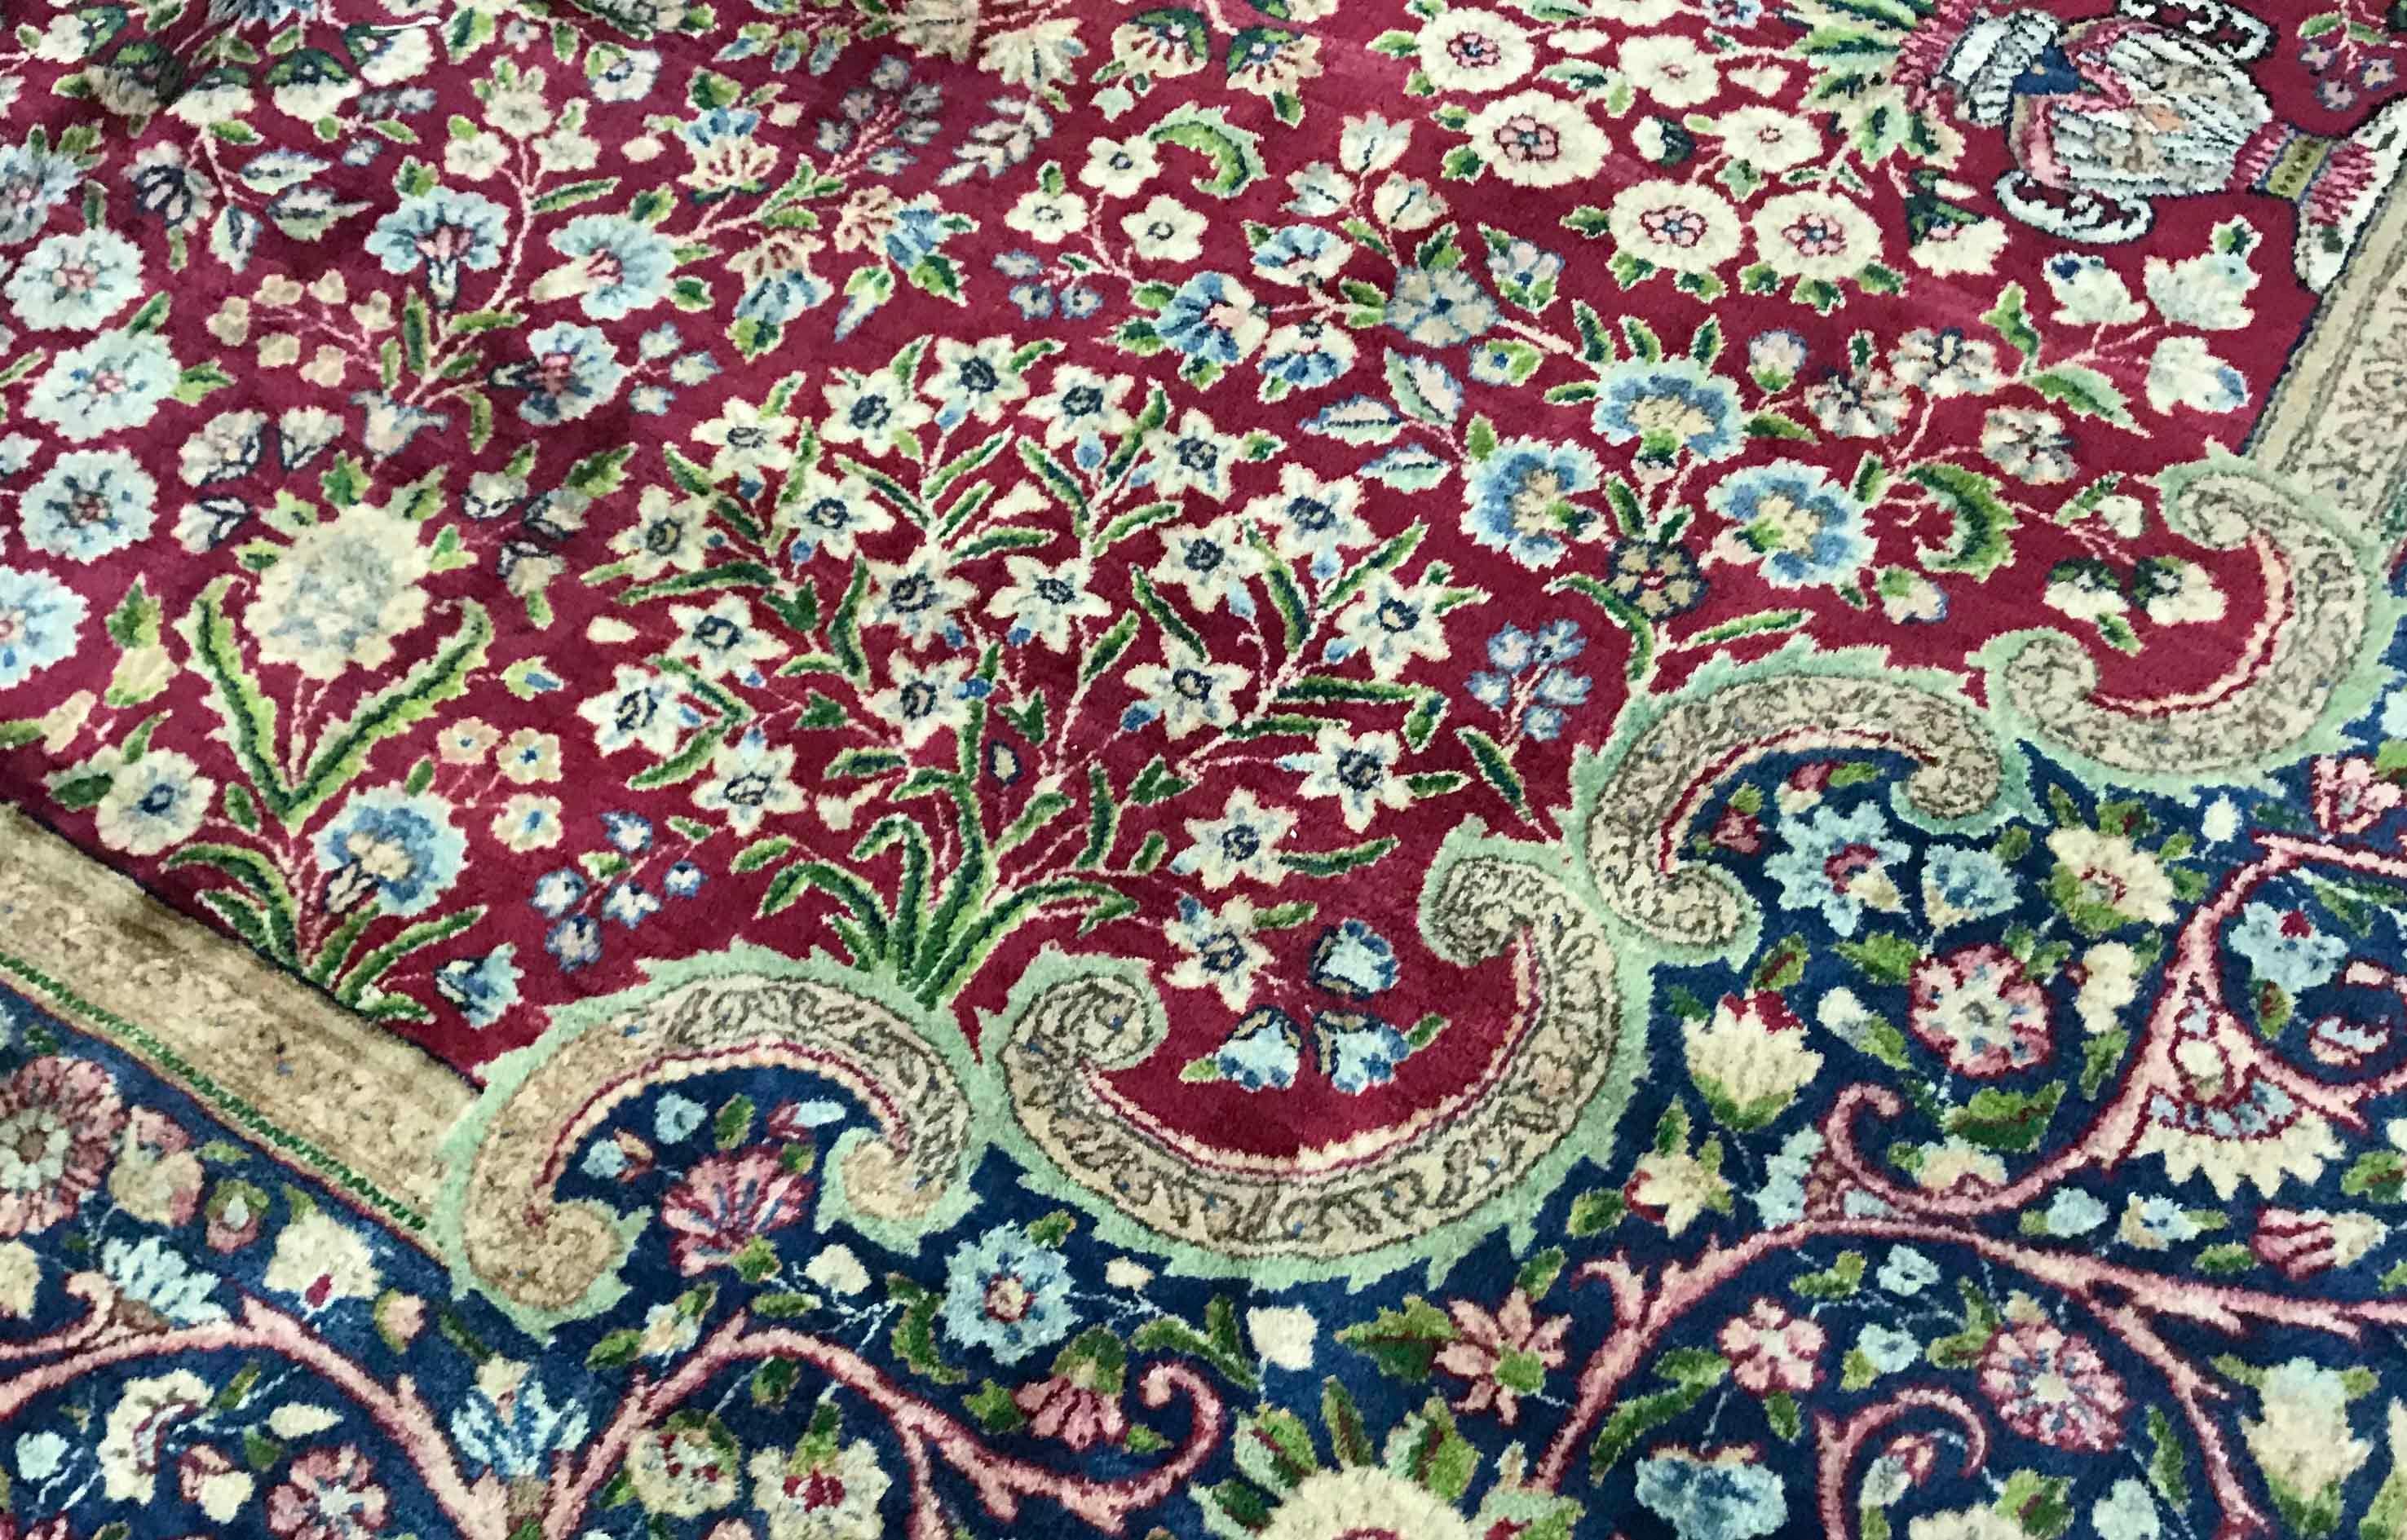 Vintage Persian Kerman rug, circa 1940. This beautiful 1940s Kerman has all the elements that make rugs from this area of Persia so popular. The color combinations combined with the amazing intricate detail creates a true masterpiece of the weaver's